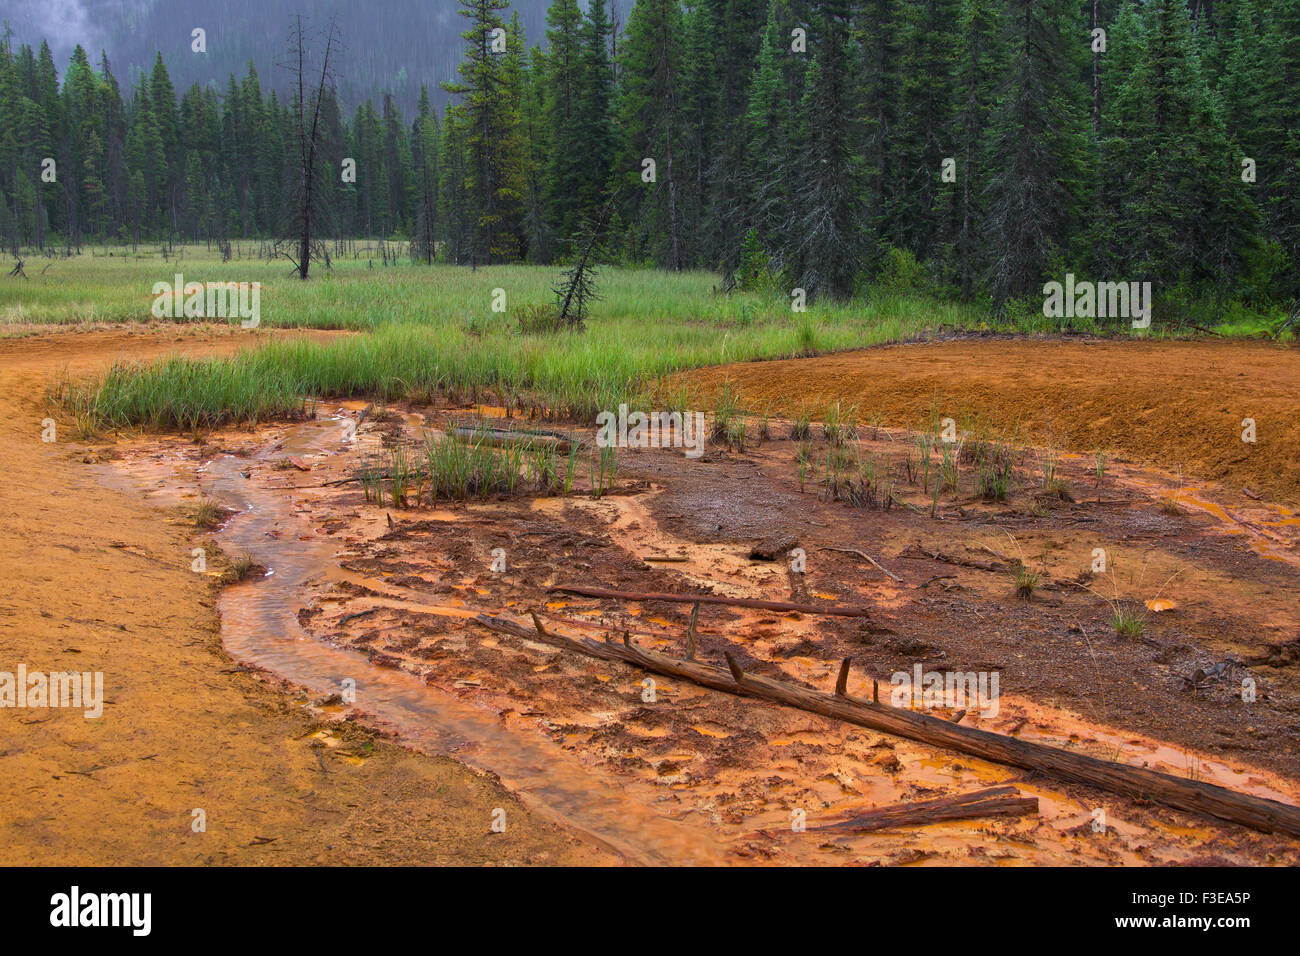 Paint Pots, iron-rich cold mineral springs in the Kootenay National Park, British Columbia, Canada Stock Photo